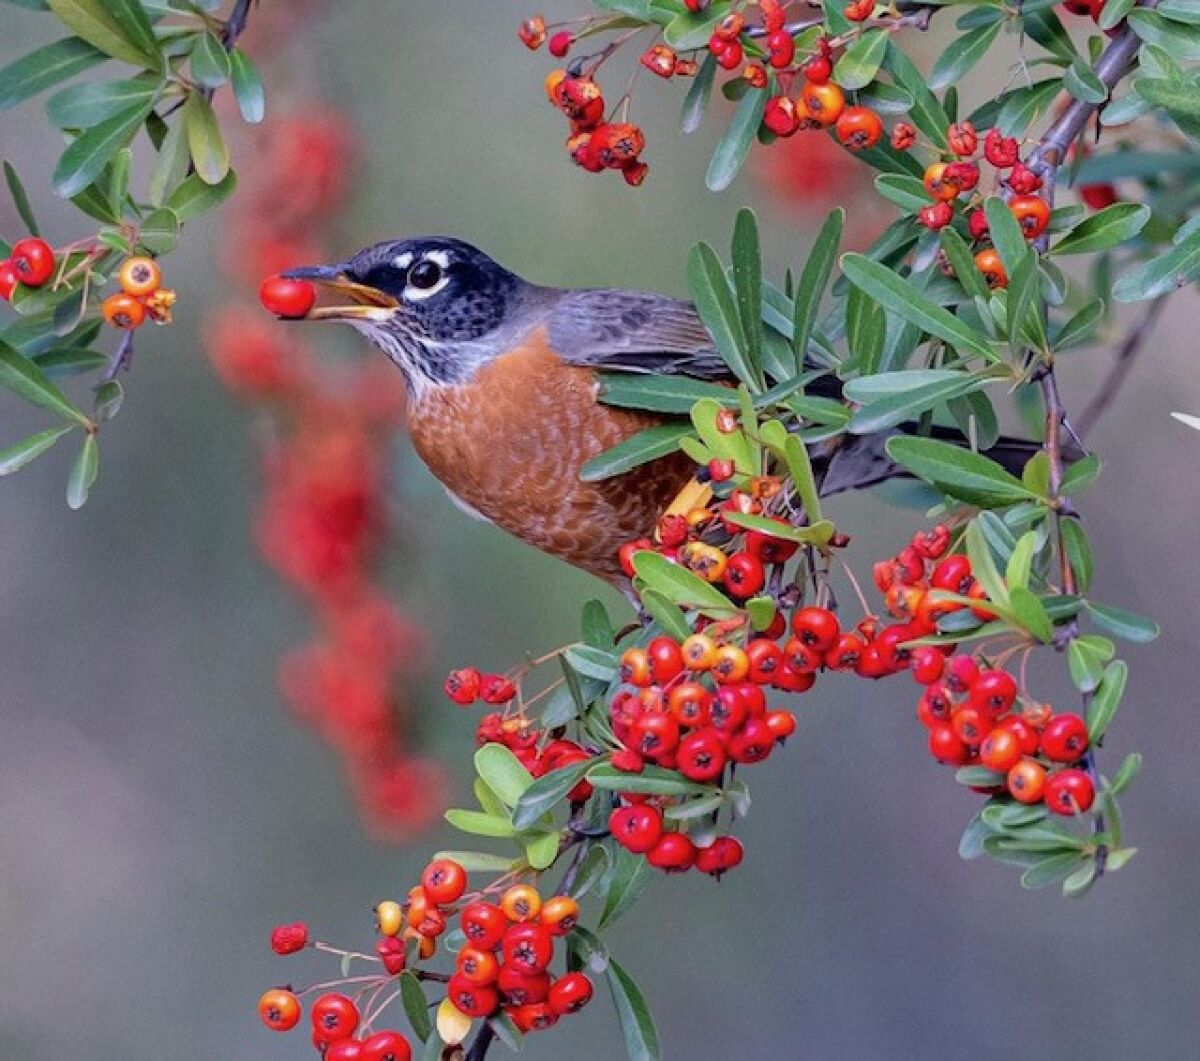 Tens of thousands of robins have flocked to San Diego County this spring, munching on berries.